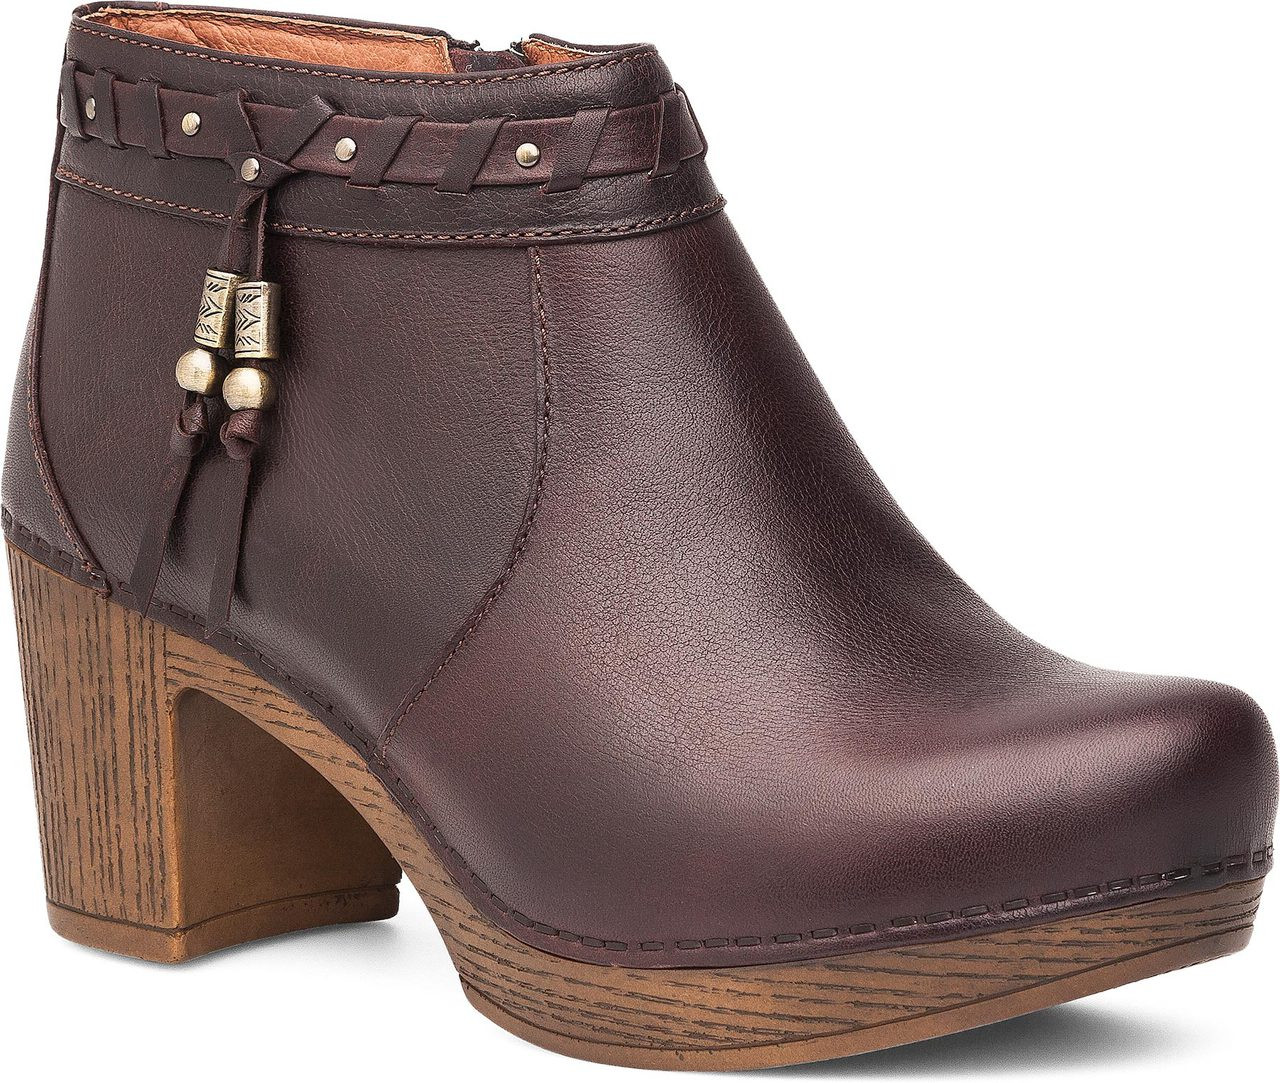 Dansko Dabney - FREE Shipping & FREE Returns - Ankle Boots, Casual ...